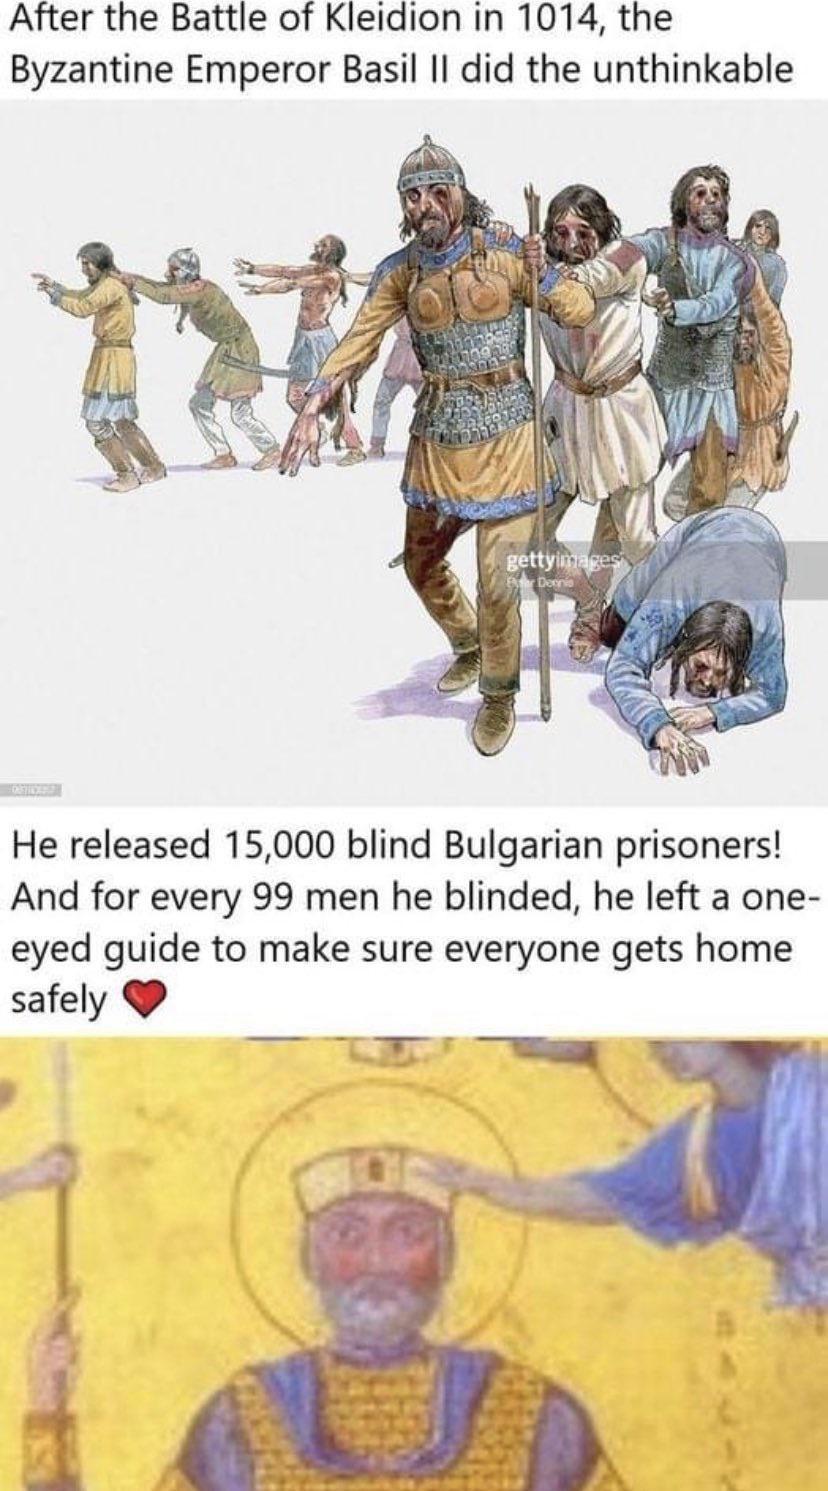 What a nice wholesome Roman emperor helping his fellow enemies get home ❤️